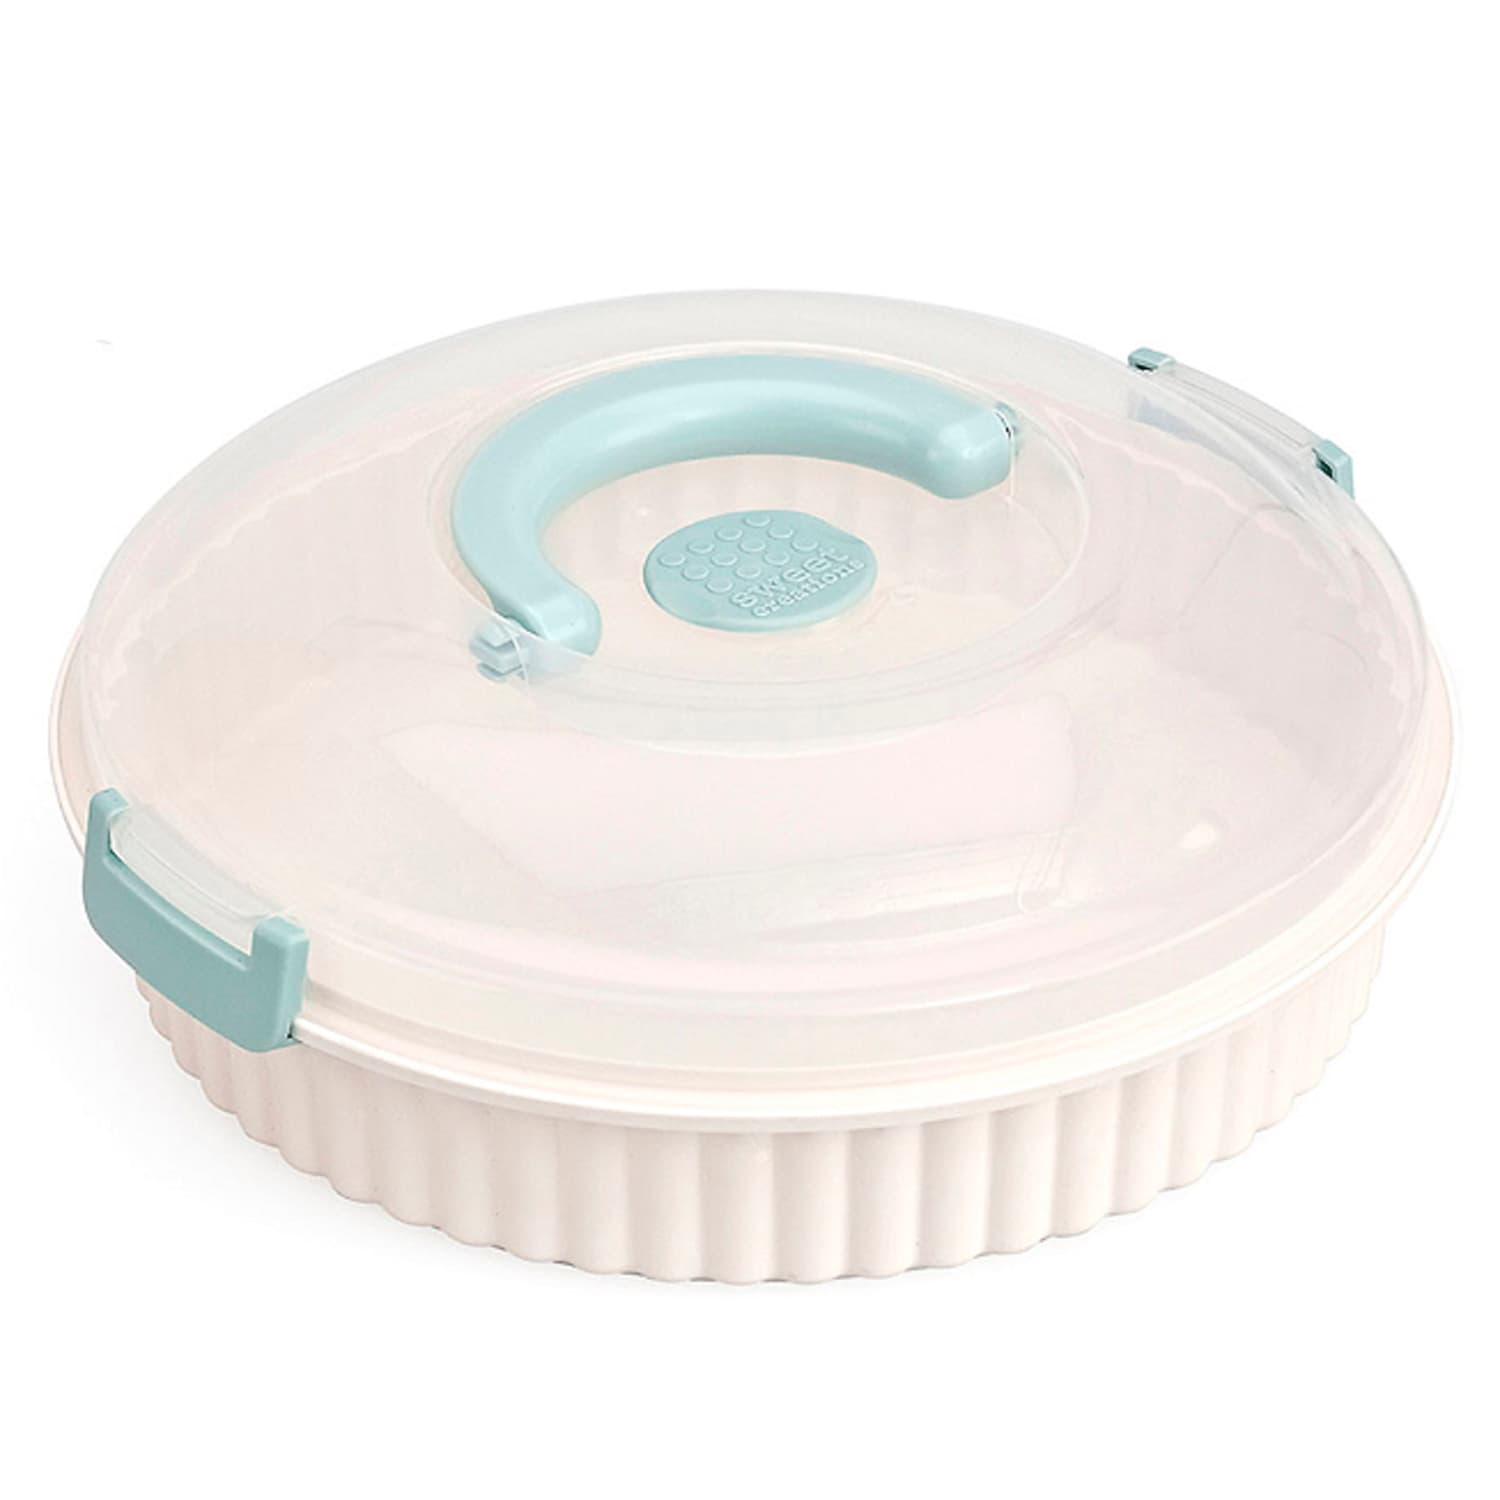 Travelin' Chef Domed Food TransportSystem w/Divider Tray & 2 Containers 